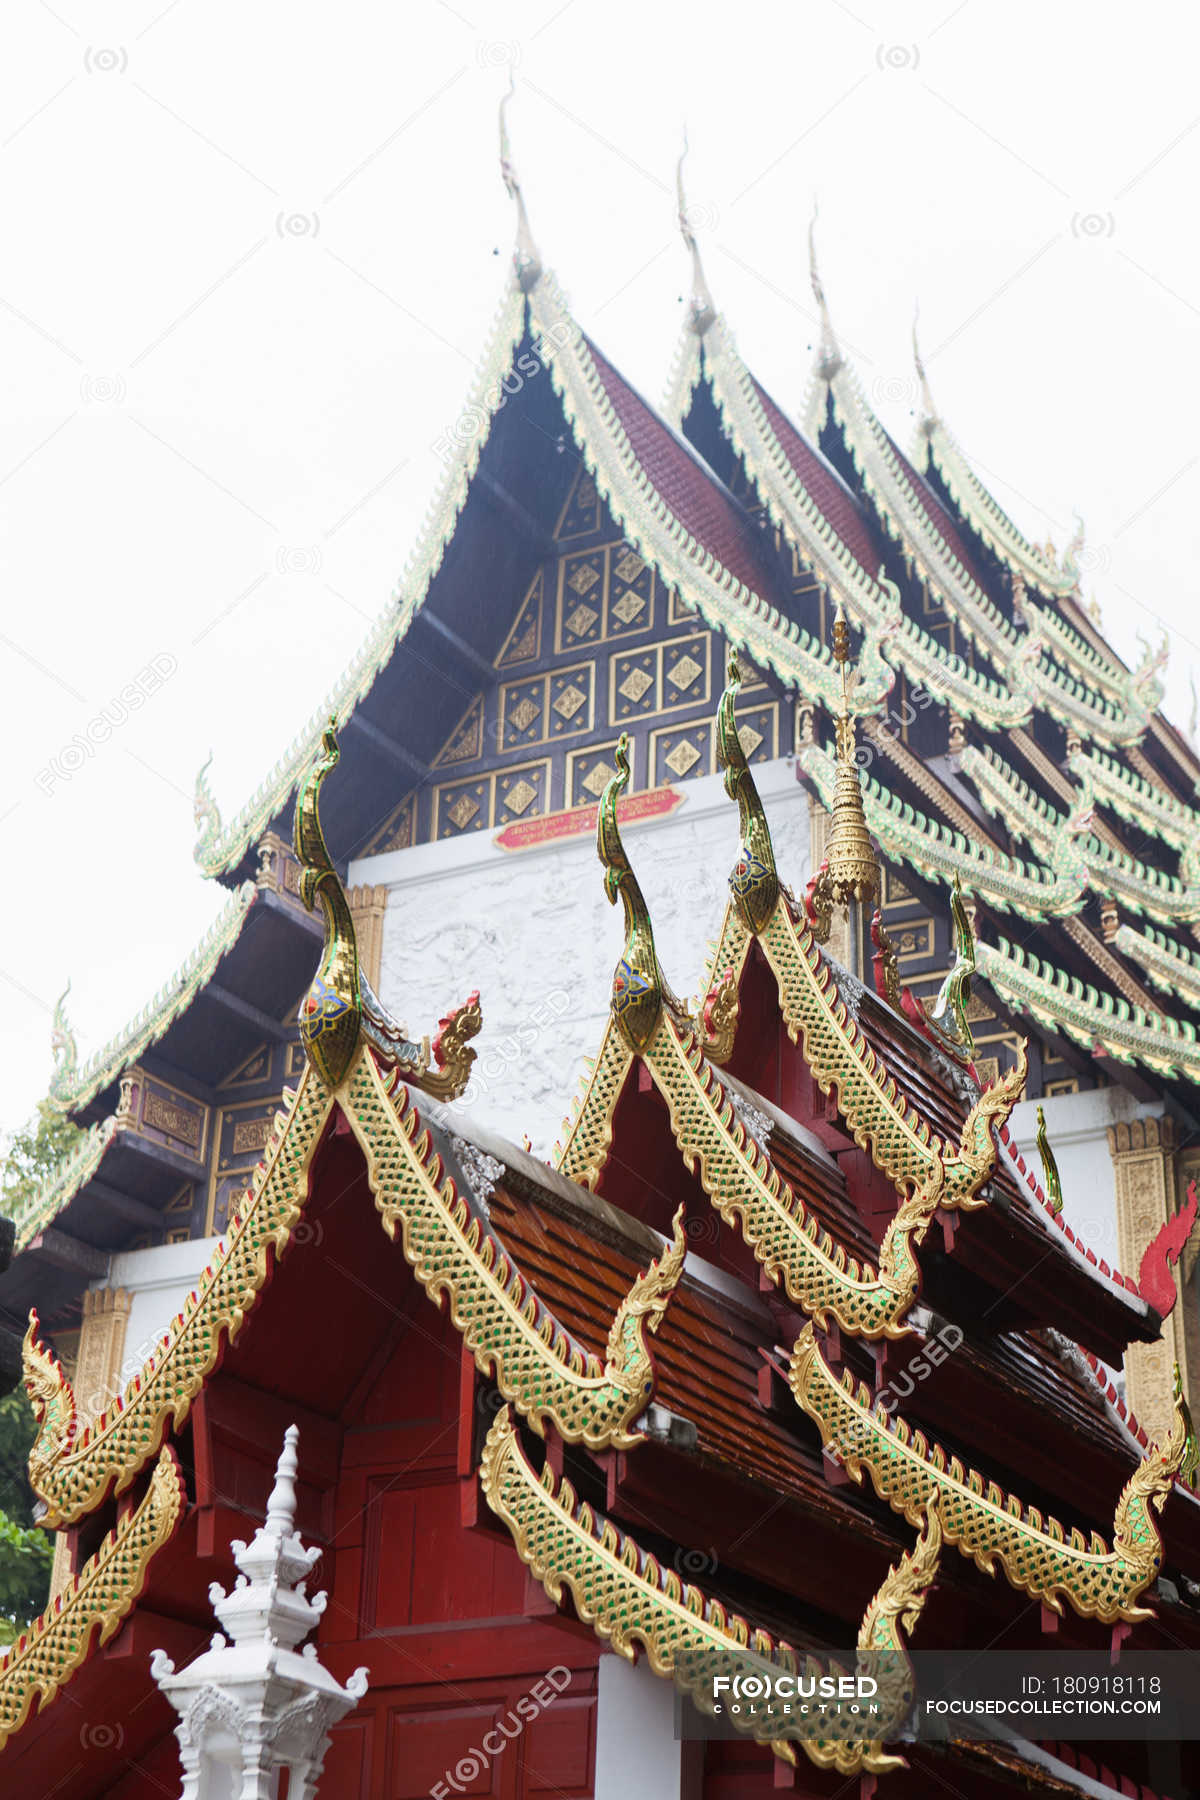 Ornate temple roof, Chiang Mai, Thailand — Stock Photo | #180918118